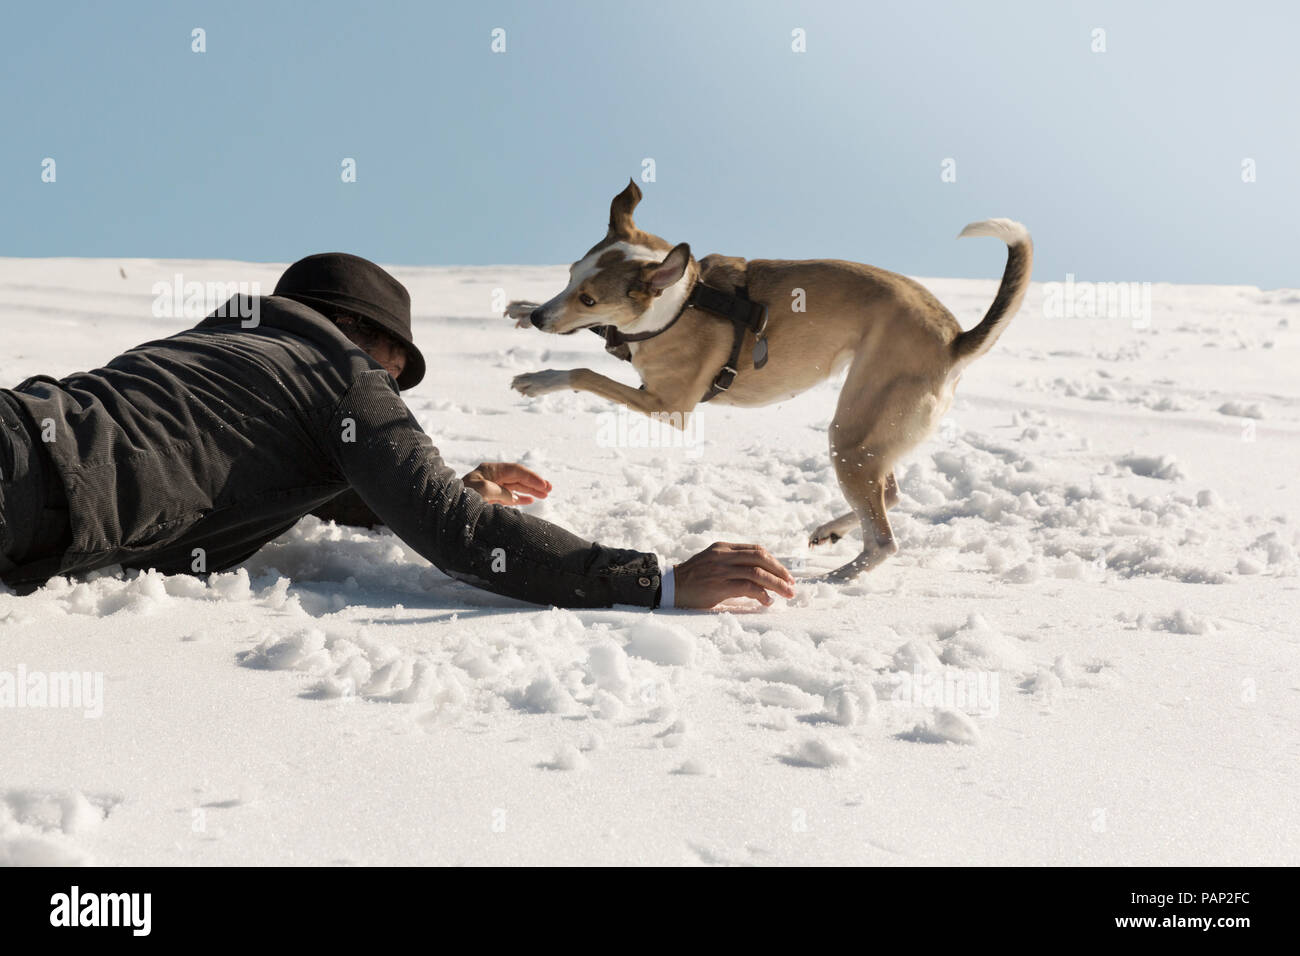 Man playing with dog in winter, lying on snow Stock Photo